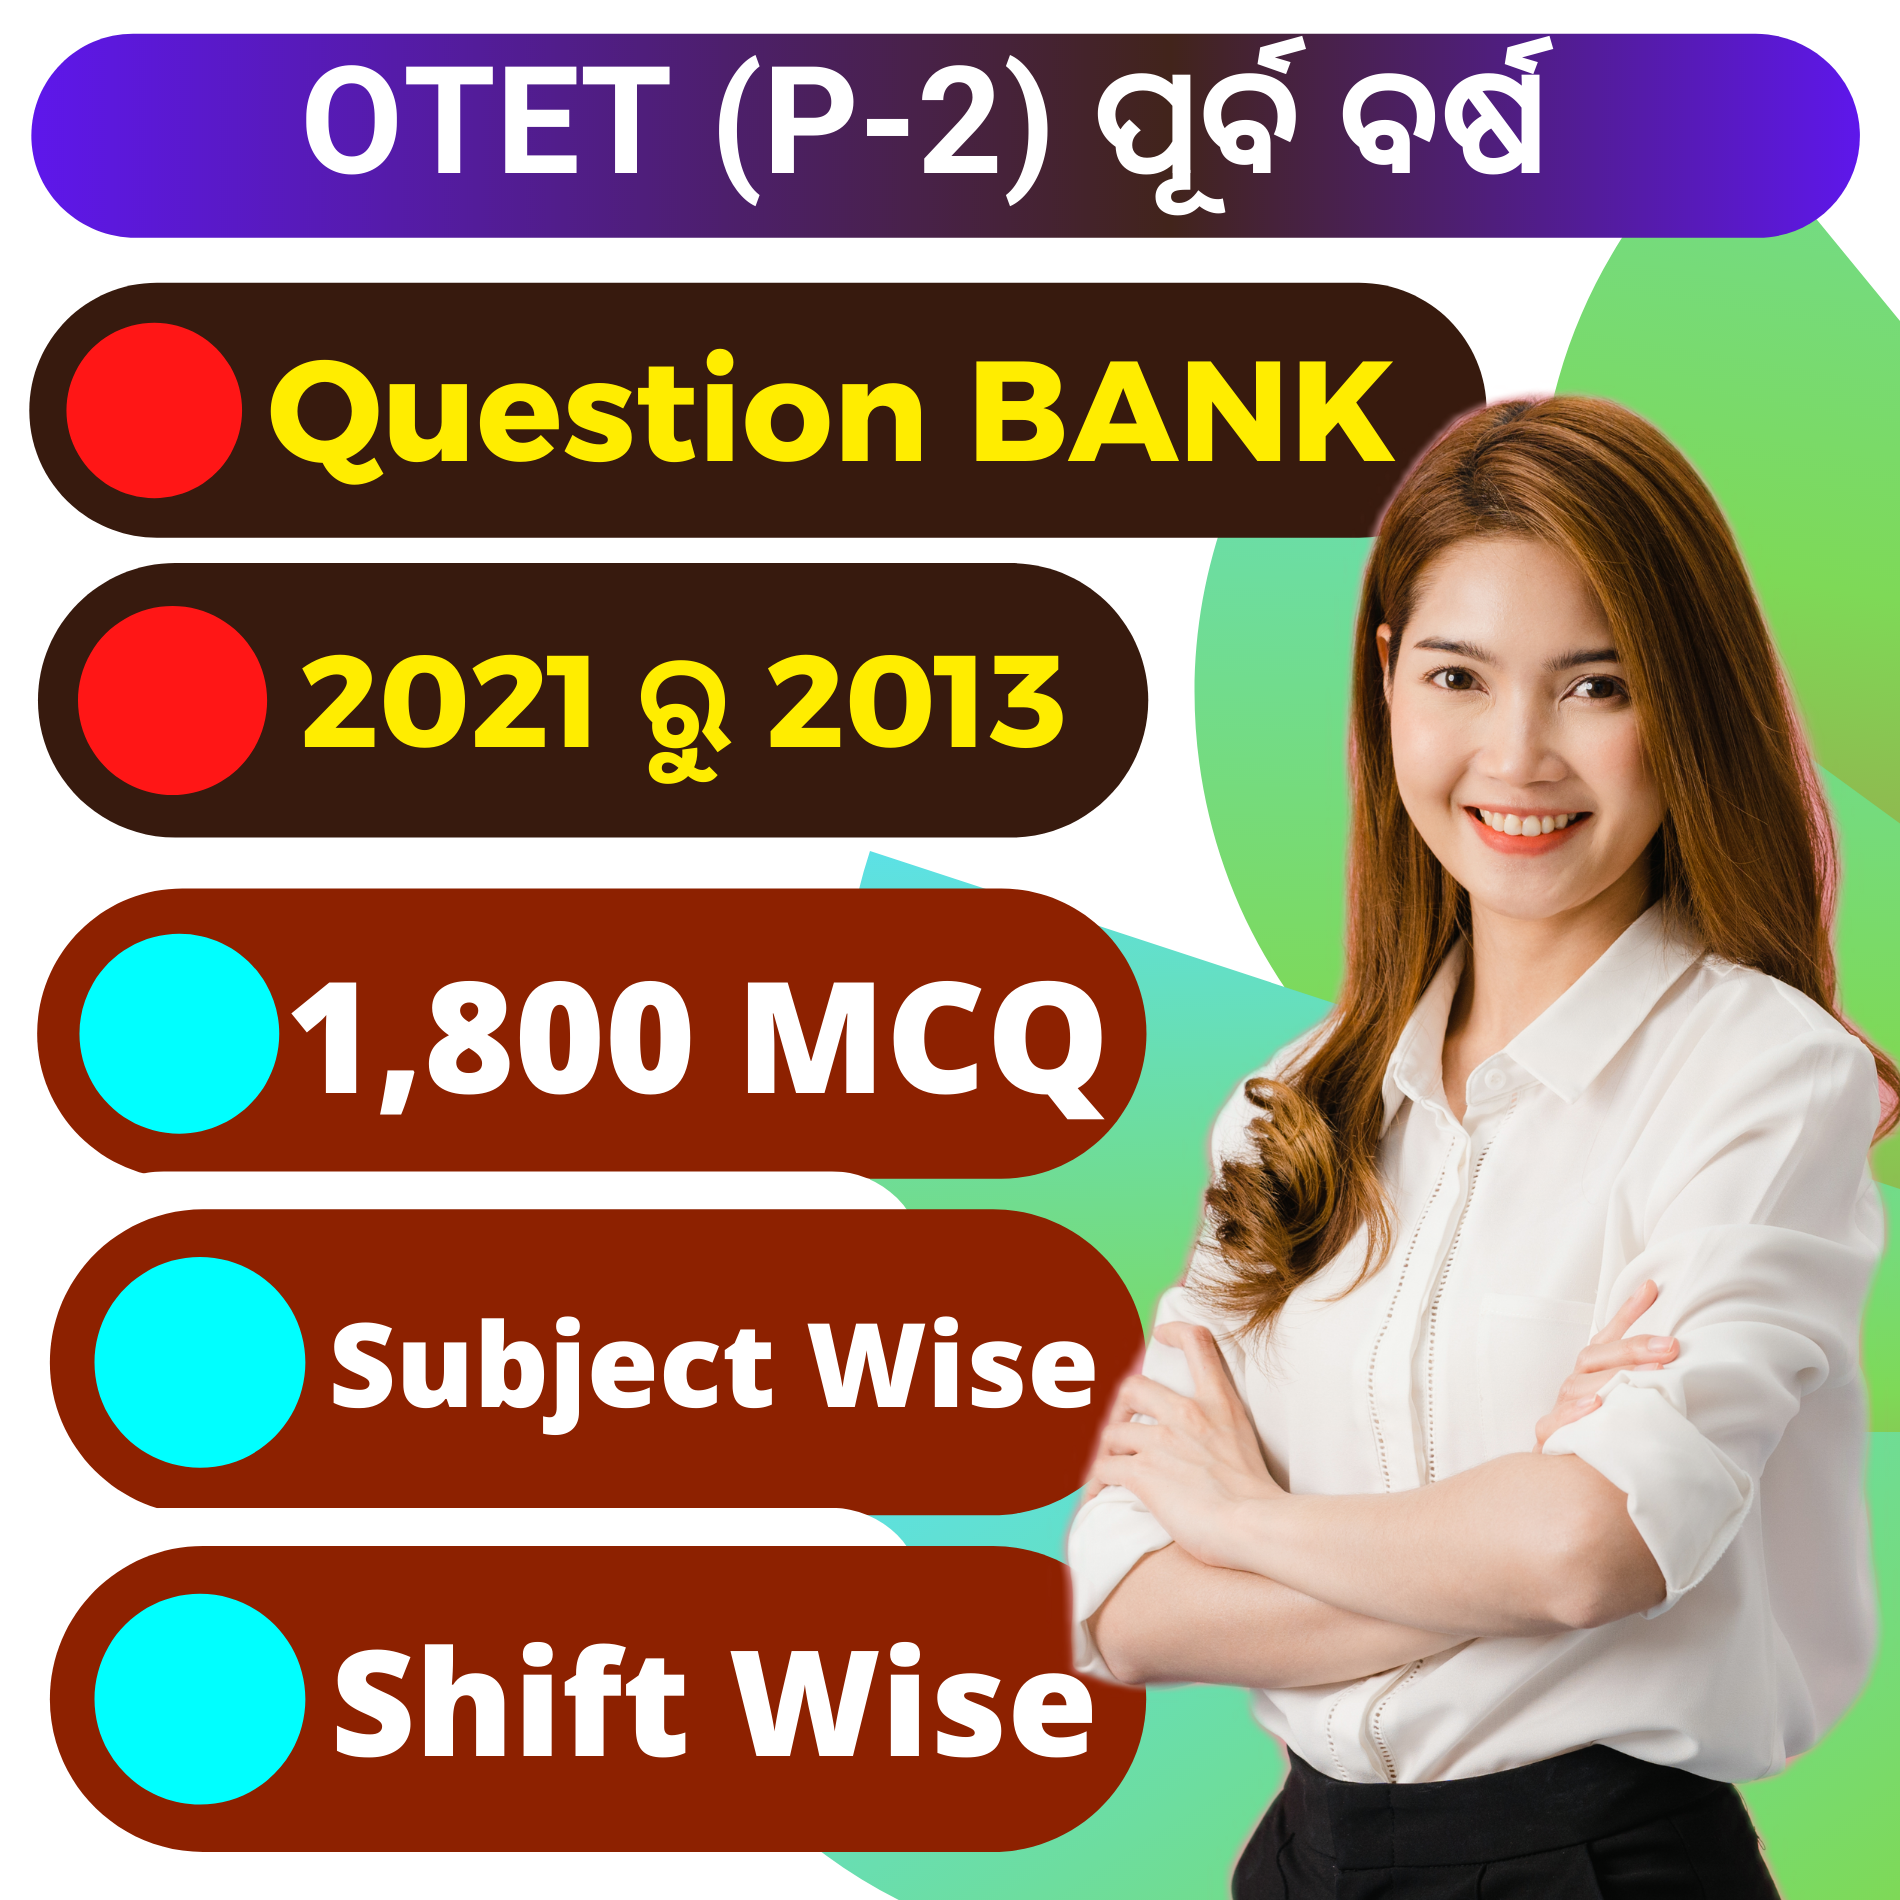 T- CT EXAM 2024 !! E-BOOK (PDF) 25,000 BEST MCQ & 5 FULL TEST !! CHAPTER WISE NEW QUESTION & PREVIOUS YEAR ALL QUESTIONS & ANSWER